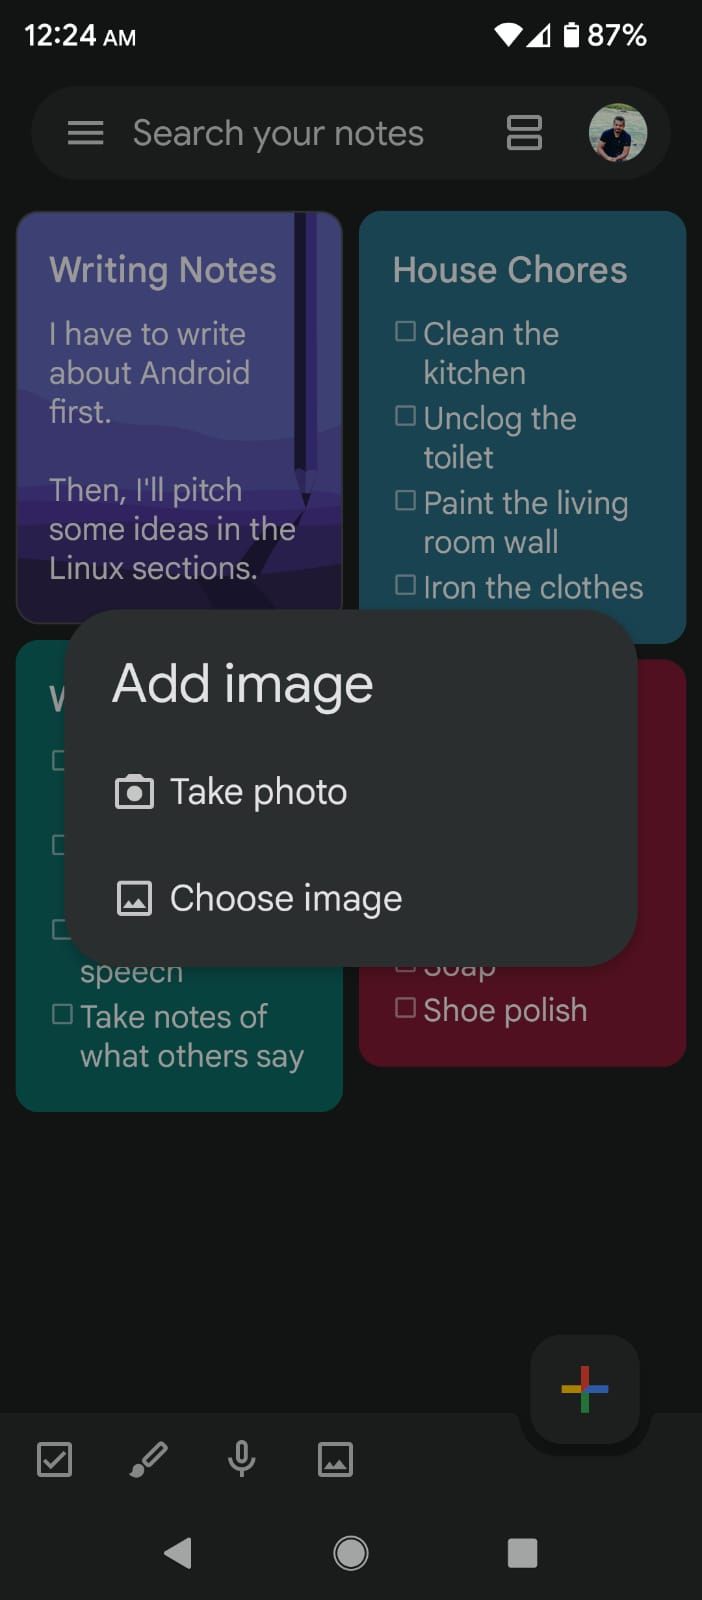 Add image to a note option in Google Keep